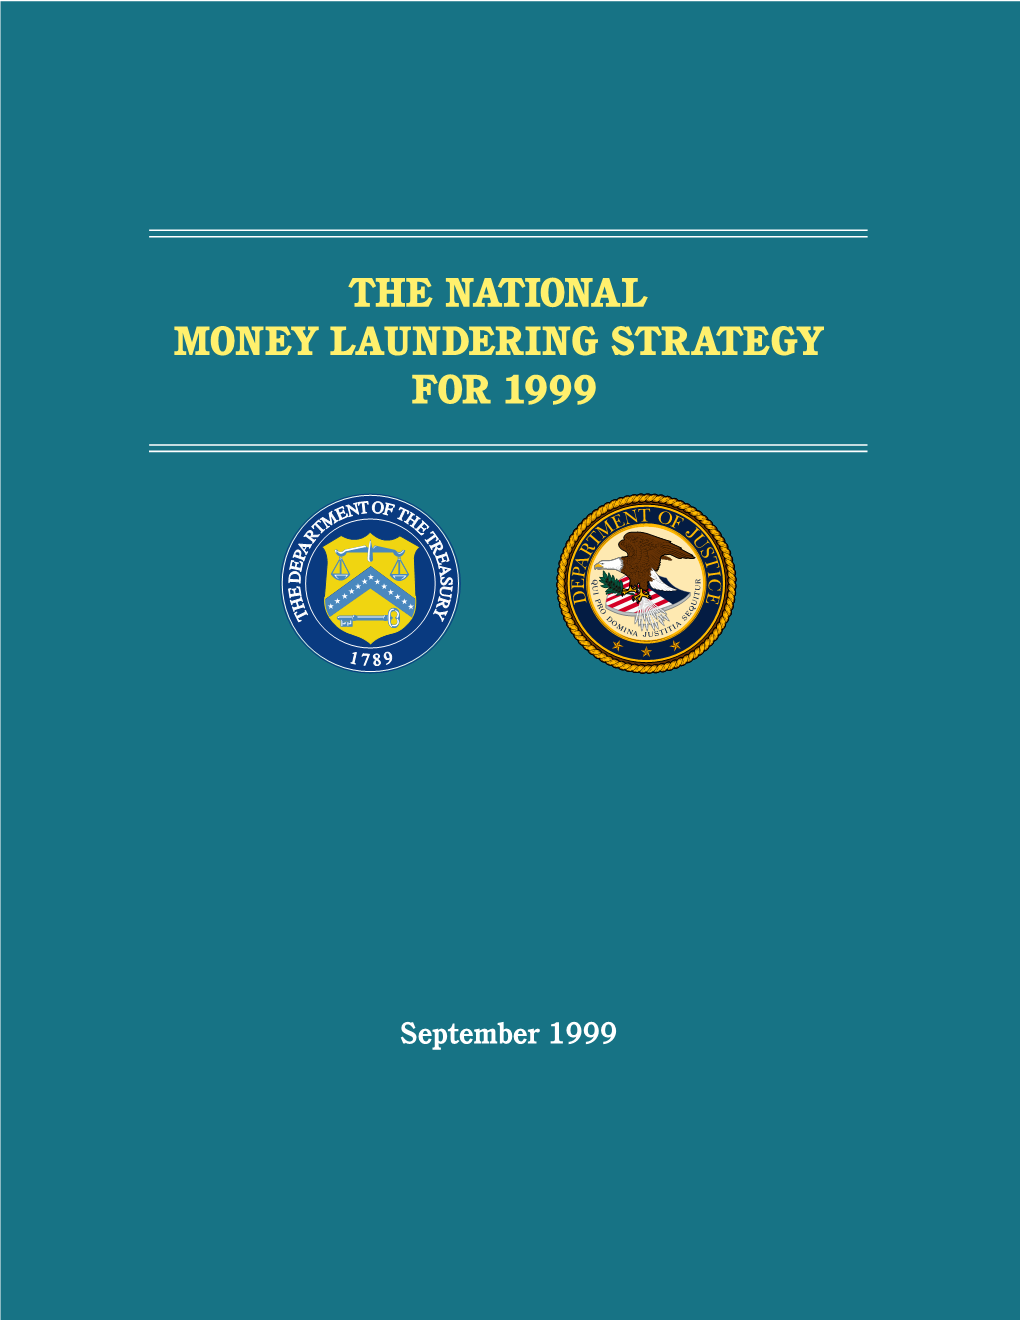 The National Money Laundering Strategy for 1999